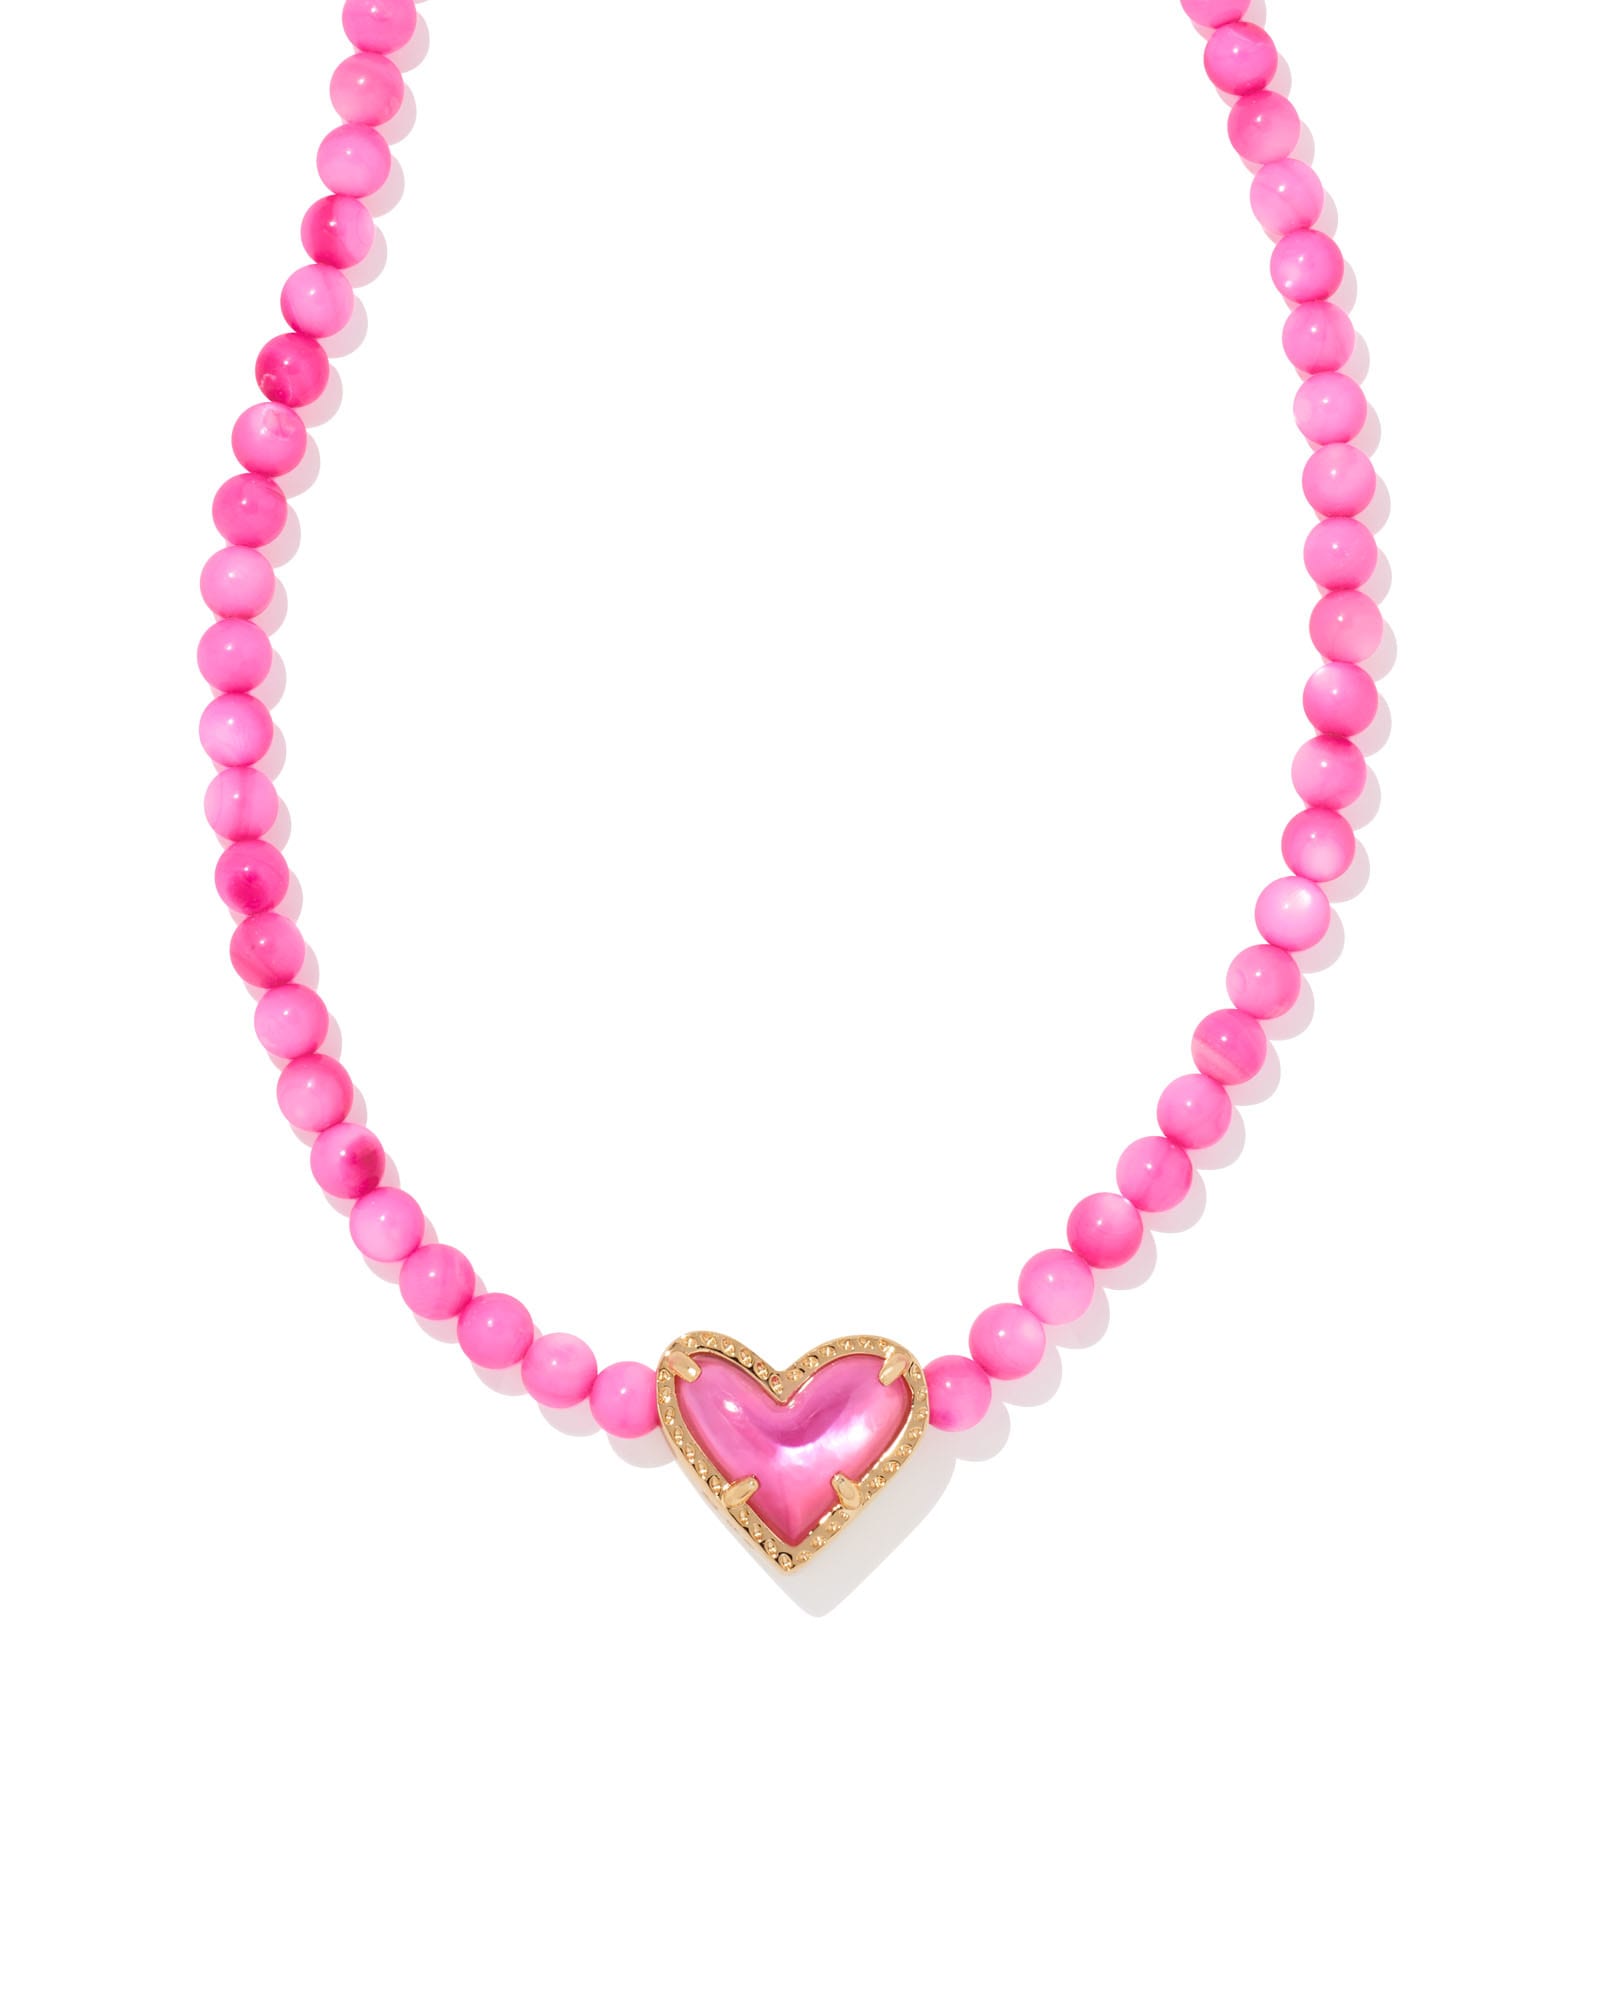 Bright Magenta Pink Heart Beads for Valentine' Day, Hot Pink Beads 